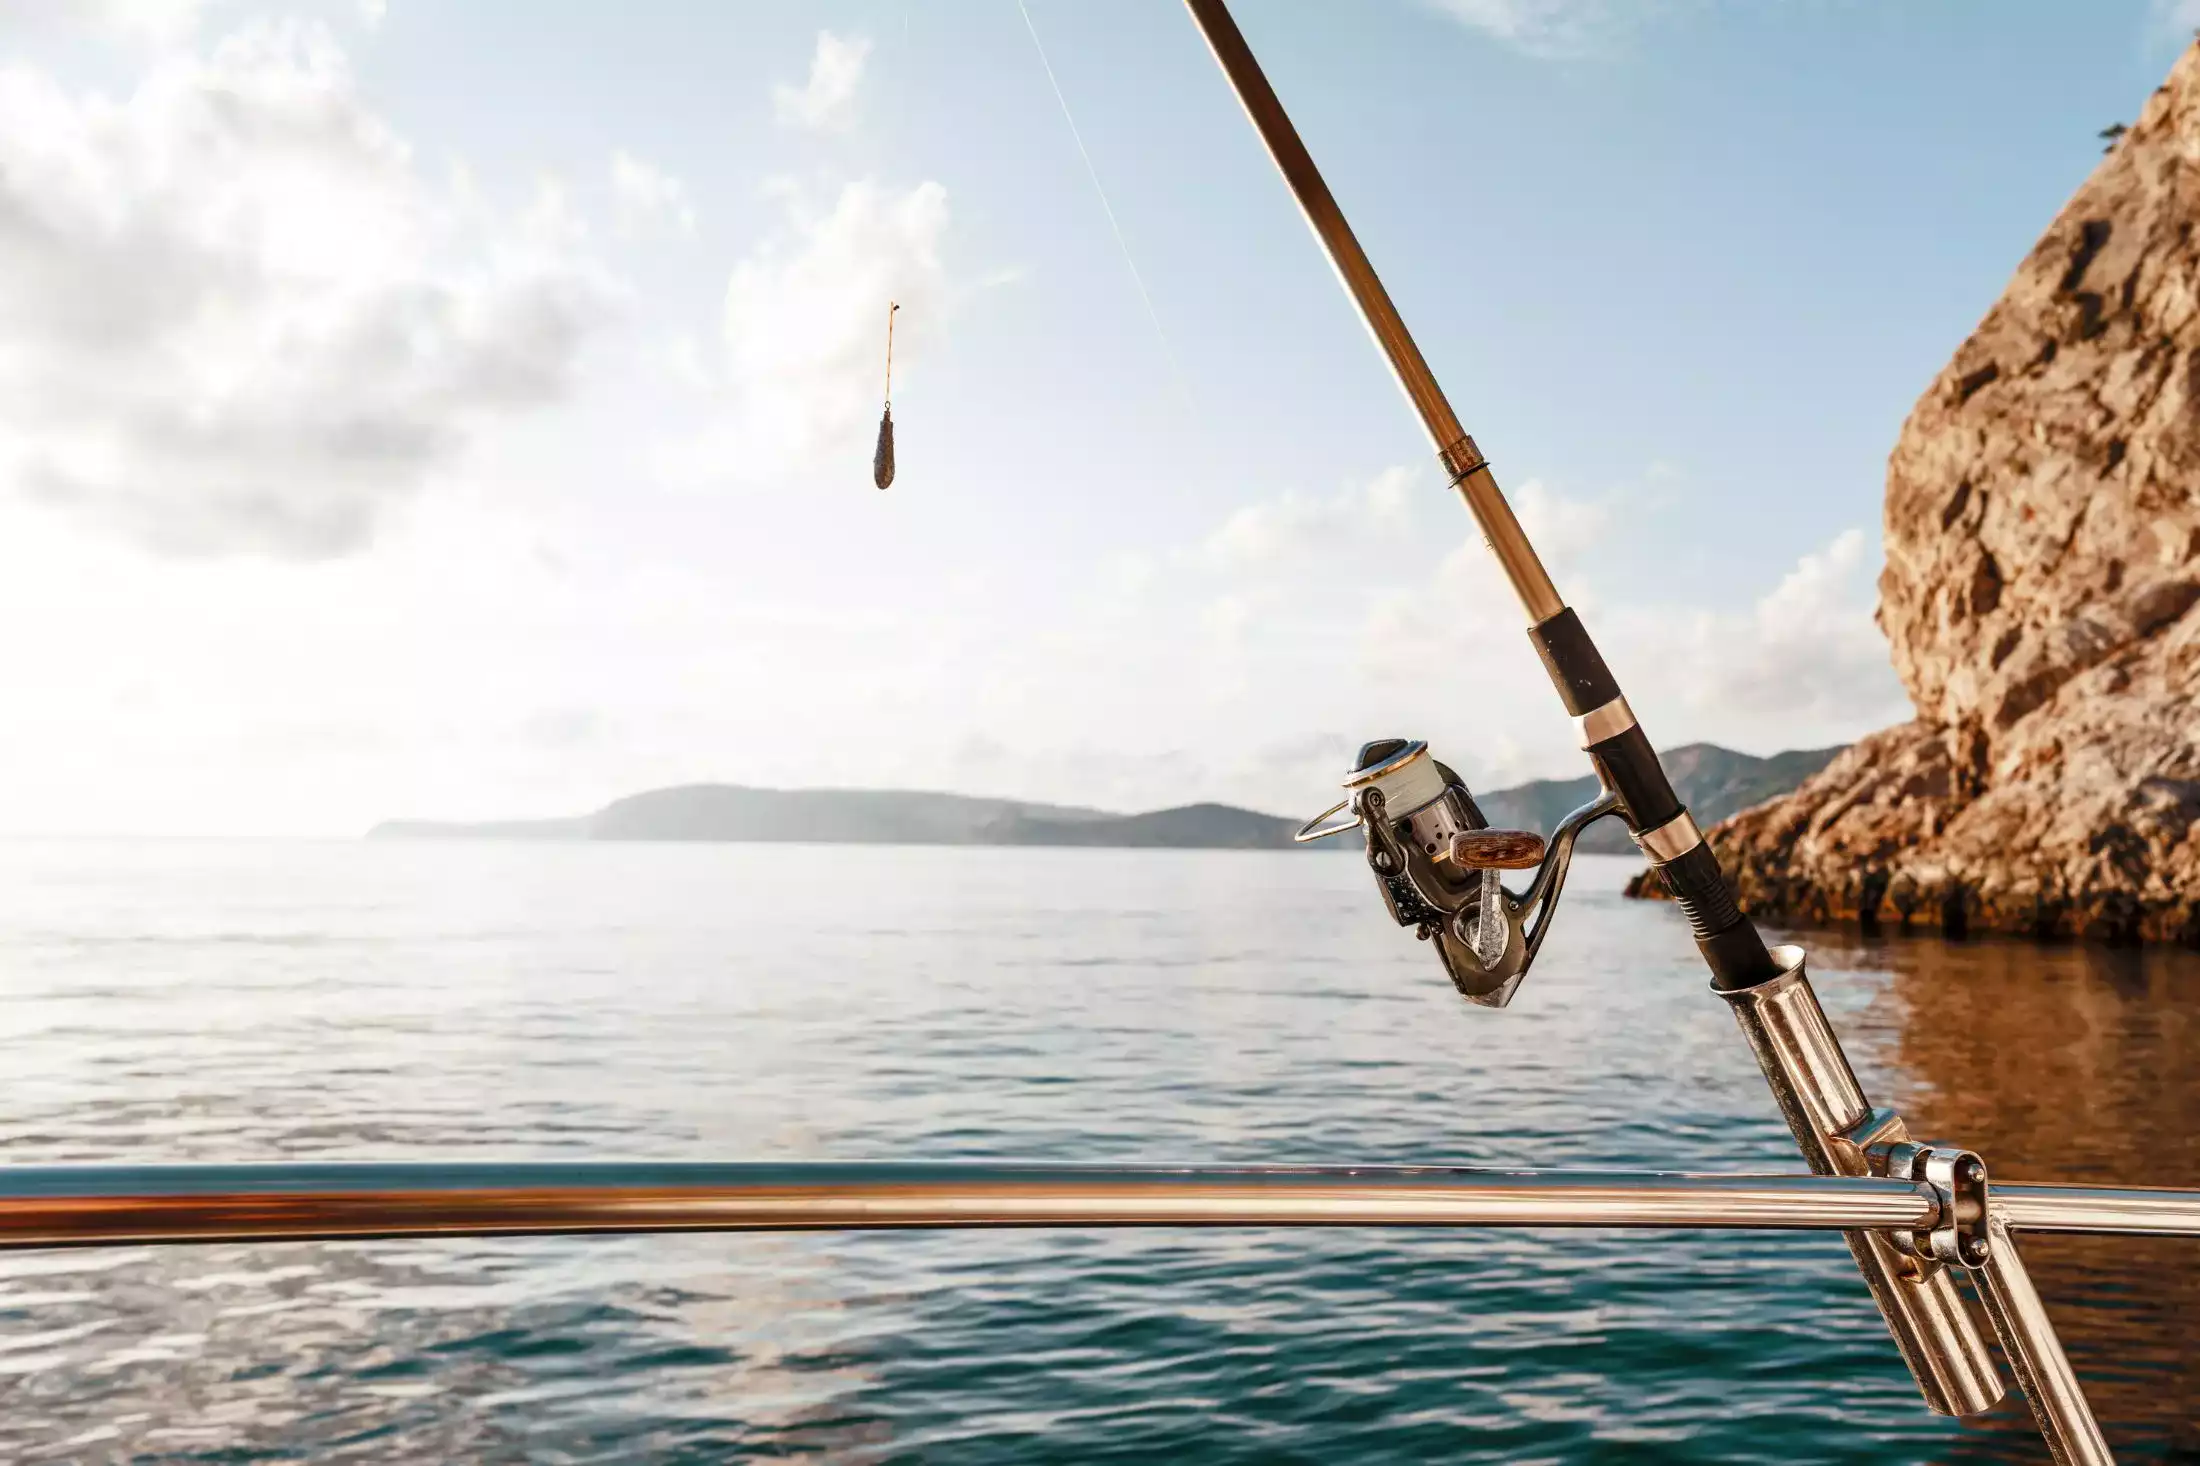 Fishing rod on a sailboat floating the ocean.